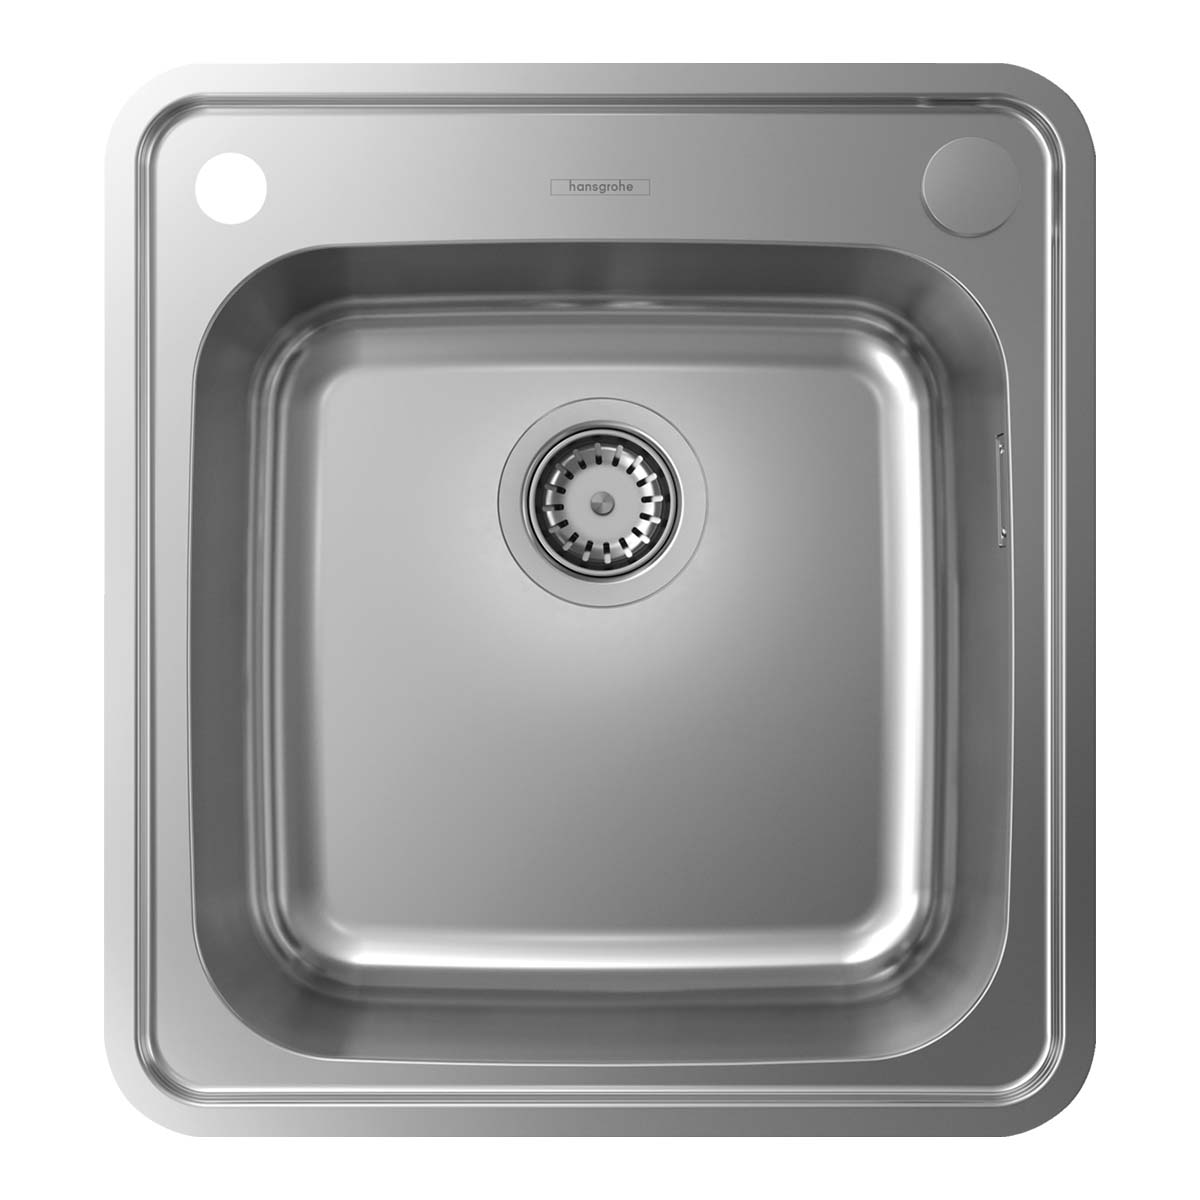 Hansgrohe S41 S412 F340 top flush mounted 2 hole single bowl kitchen sink 470x510mm